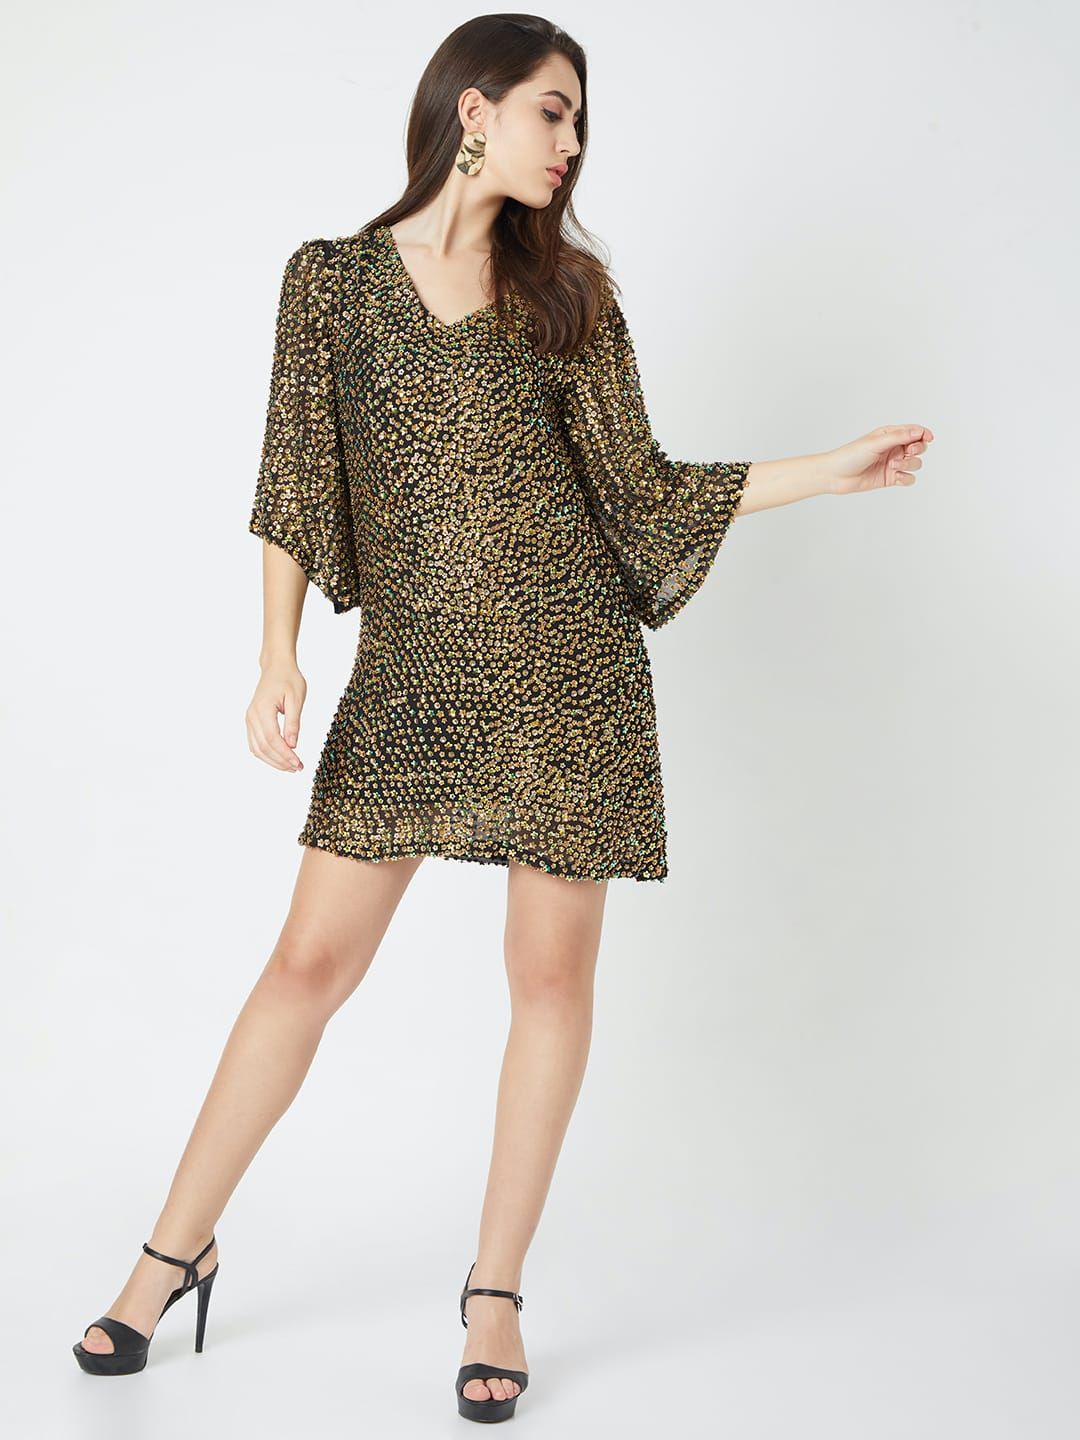 The Zahara Sequin Party Dresses - Reema Anand Label